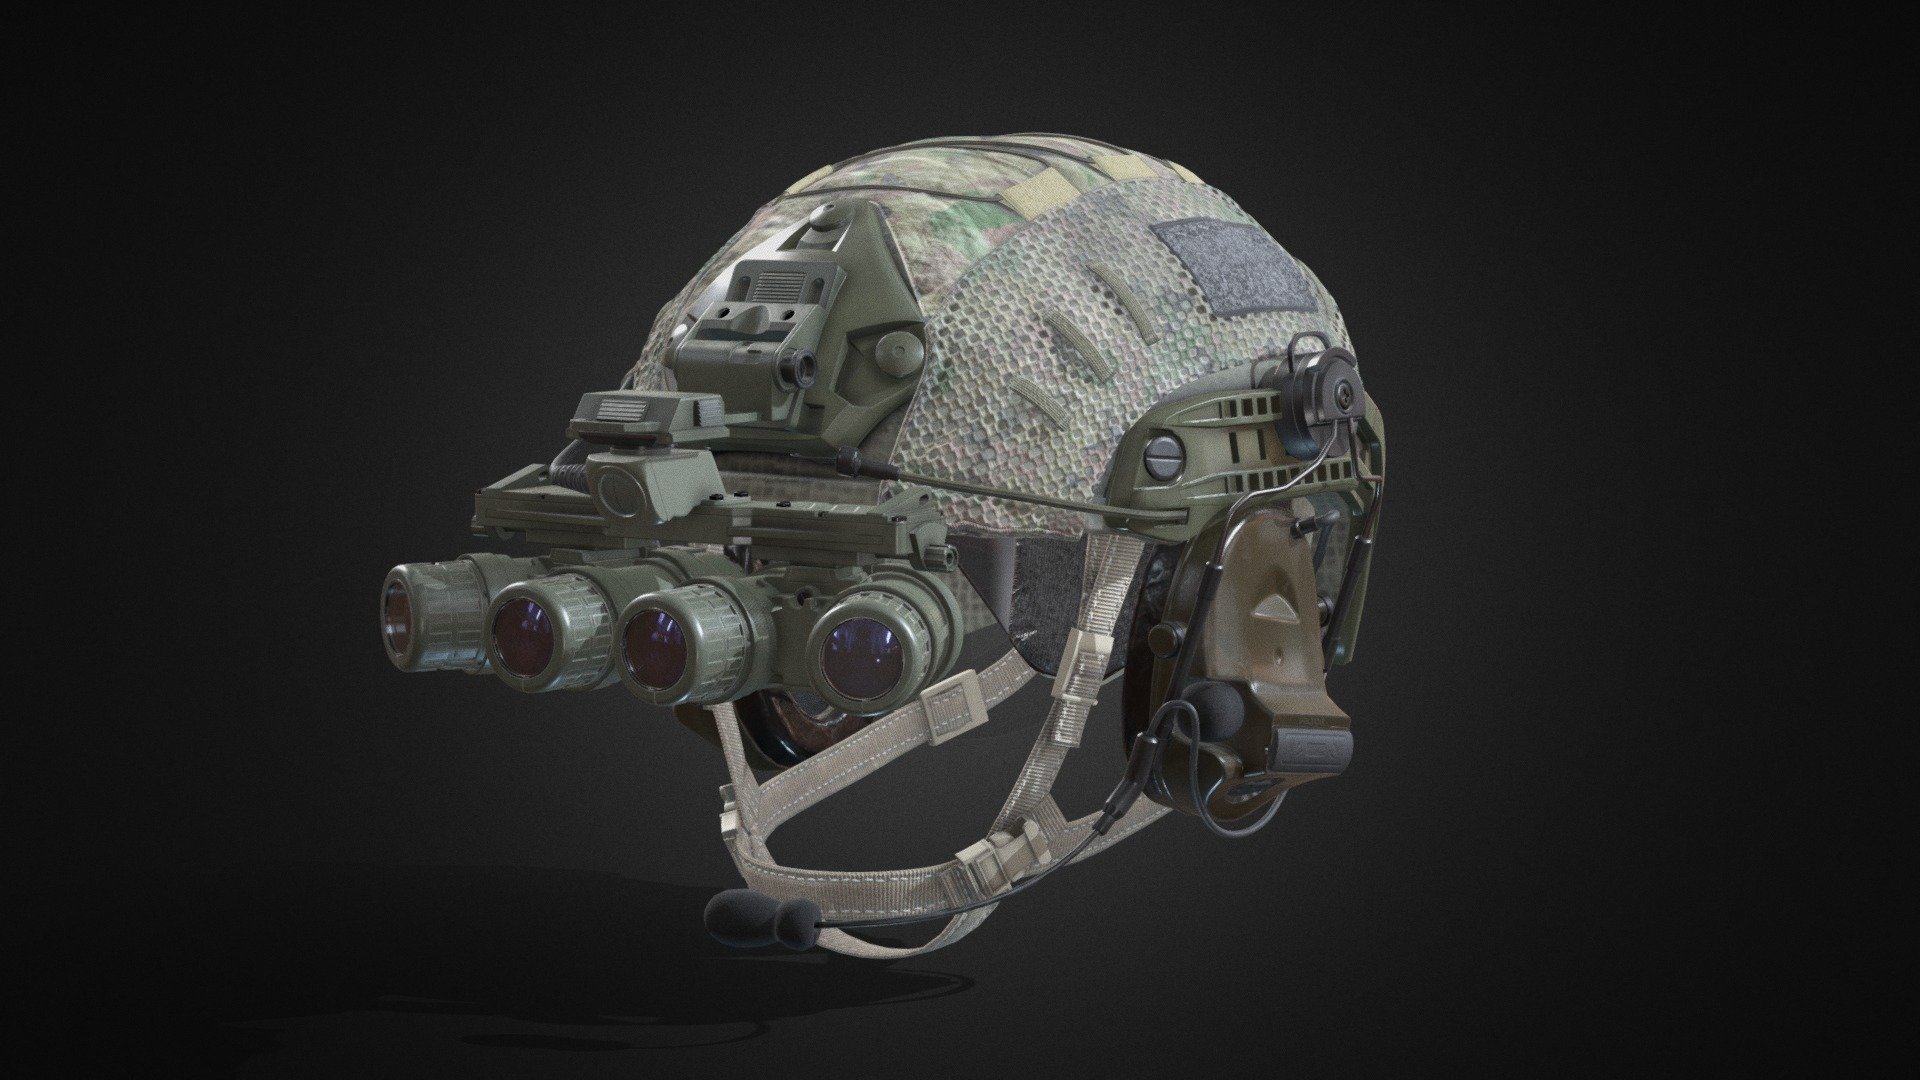 Non-ballistic helmet, Peltor hearing protection, distinct panoramic nightvision GPNVG-18 goggles and o lot of work. Enjoy!
Personal project to improve my workflow. 
Modeling done in Blender 2.83. For textures I used Substance Painter and Photoshop for slight touches on both textures and renders.

For more renders and version with balaclava and face you can check my ArtStation: https://www.artstation.com/artwork/5Xr4n1
I'd love to hear what you think :) - GPNVG-18 & Helmet - 3D model by Lemon24 3d model